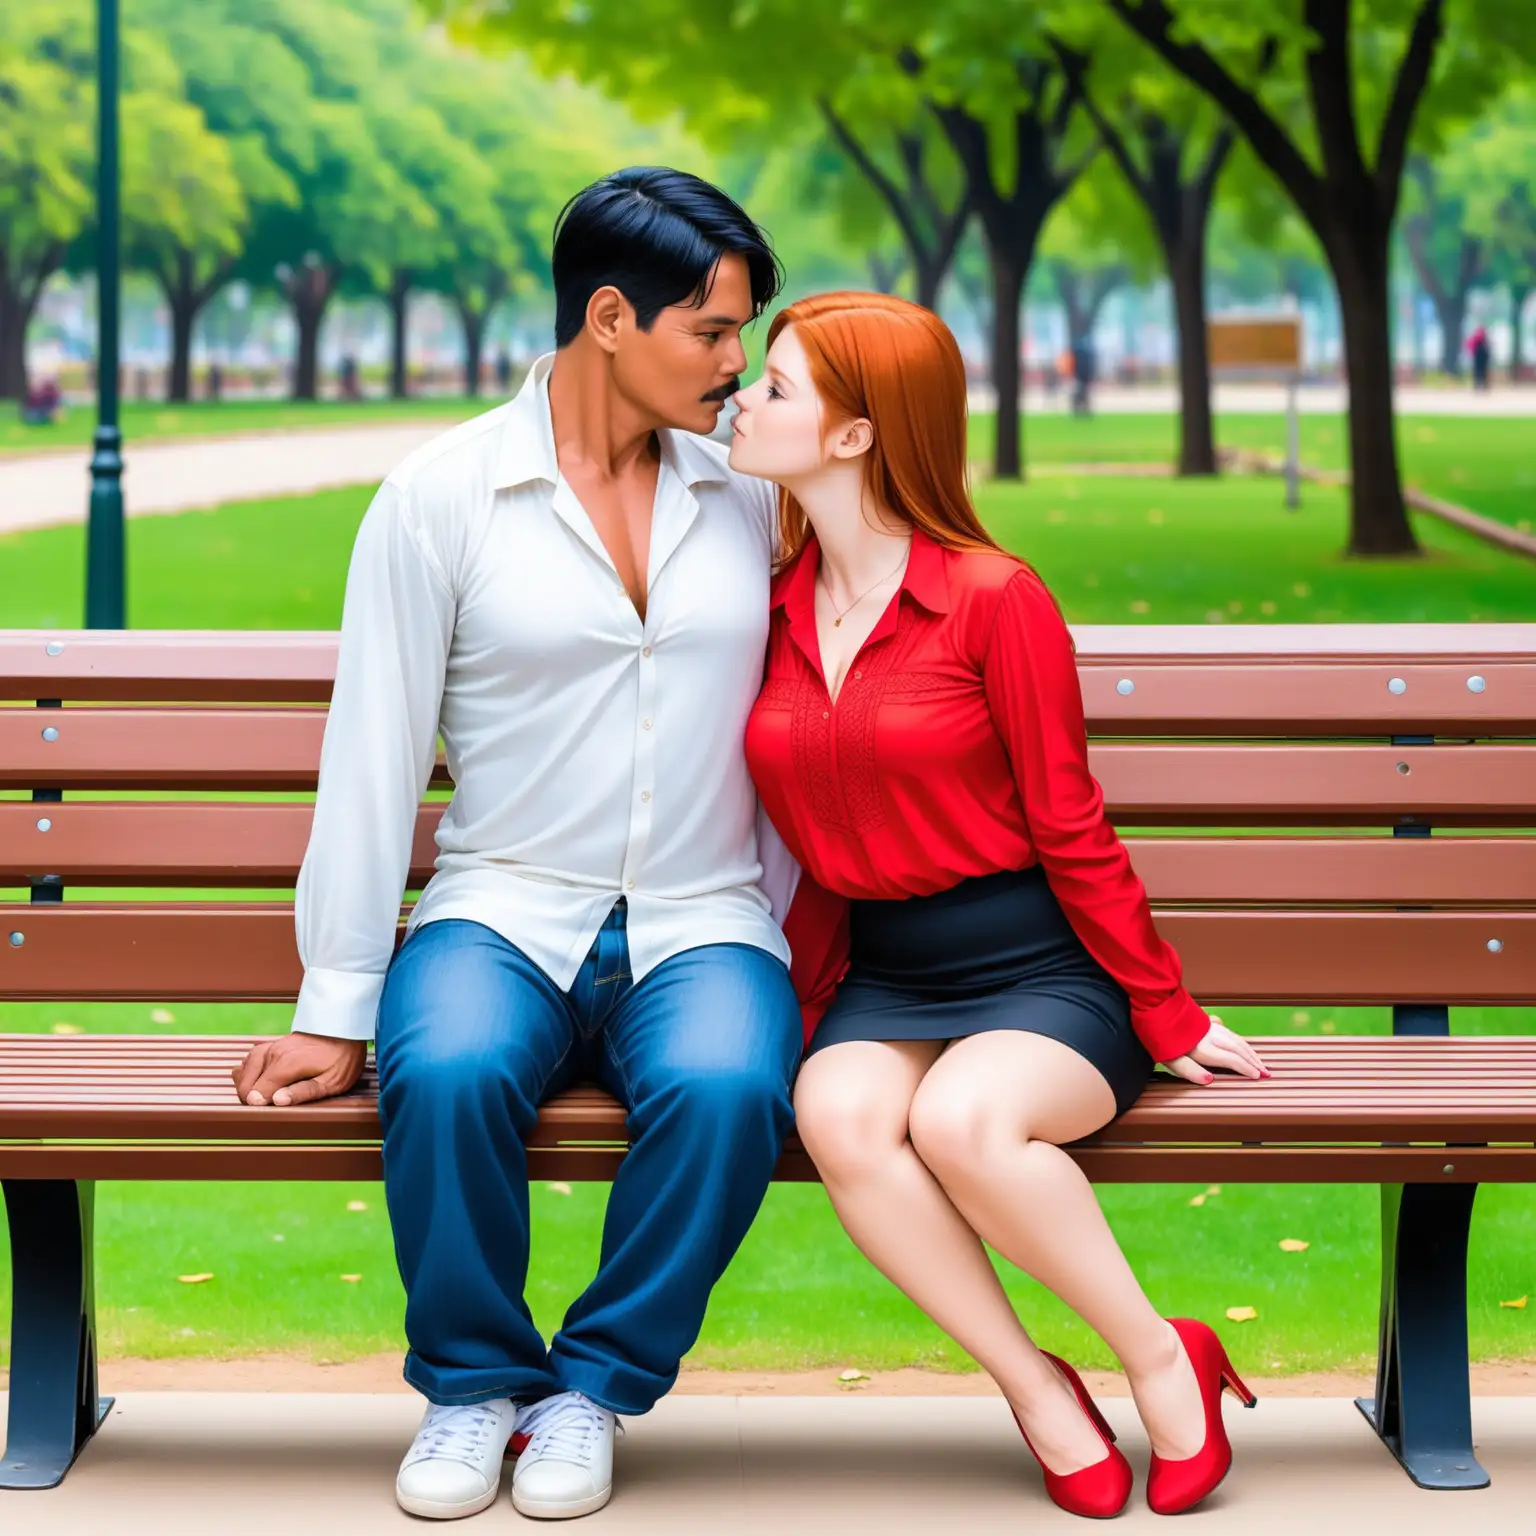 Passionate Couple Embracing on Park Bench and Table Date